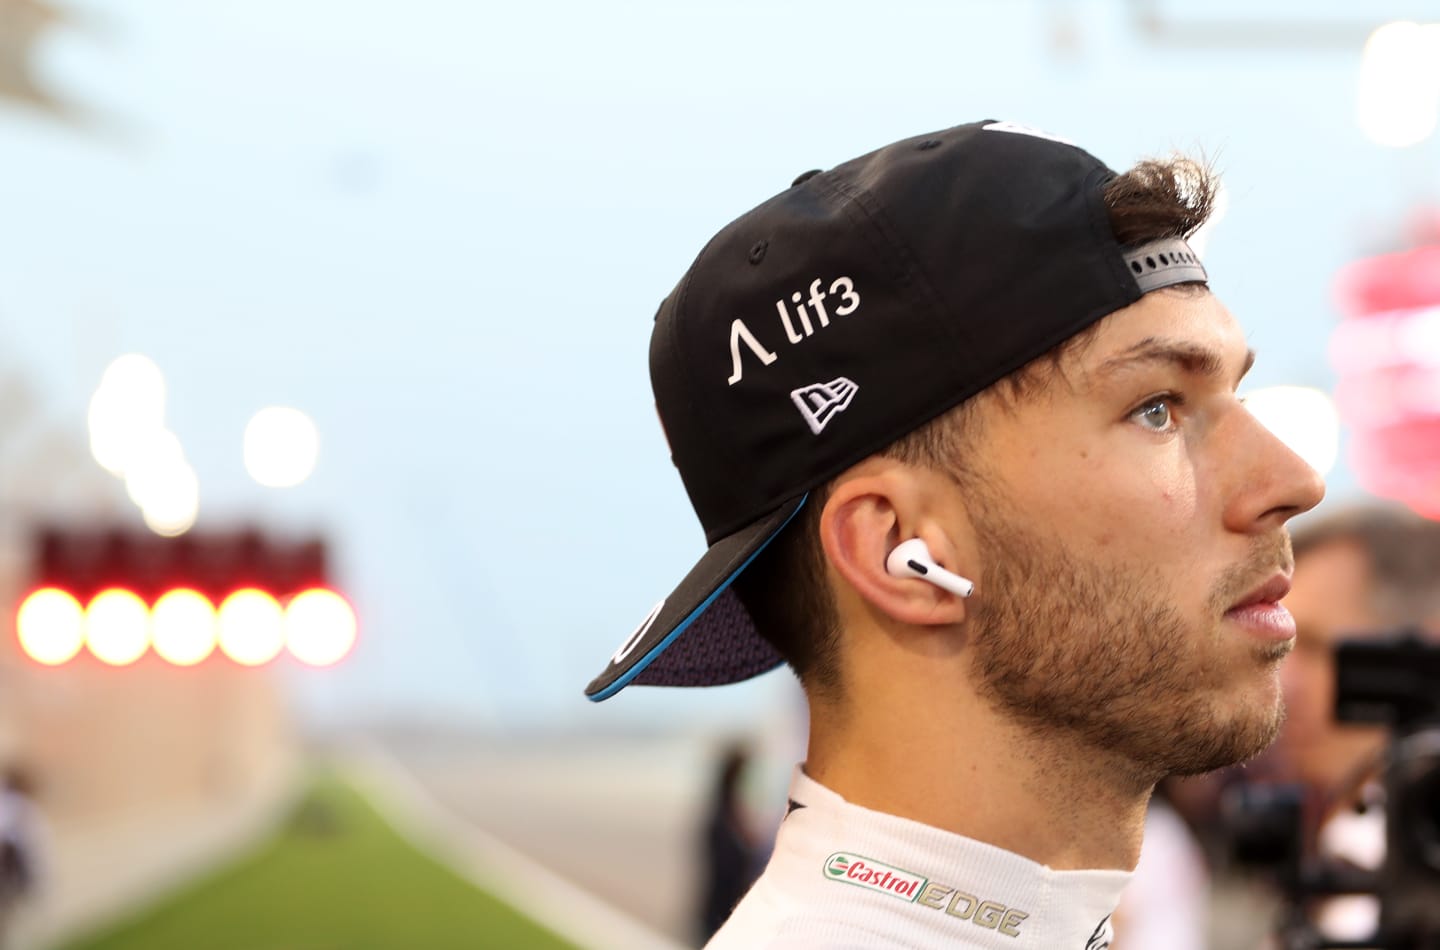 BAHRAIN, BAHRAIN - MARCH 05: Pierre Gasly of France and Alpine F1 prepares to drive on the grid during the F1 Grand Prix of Bahrain at Bahrain International Circuit on March 05, 2023 in Bahrain, Bahrain. (Photo by Peter Fox/Getty Images)